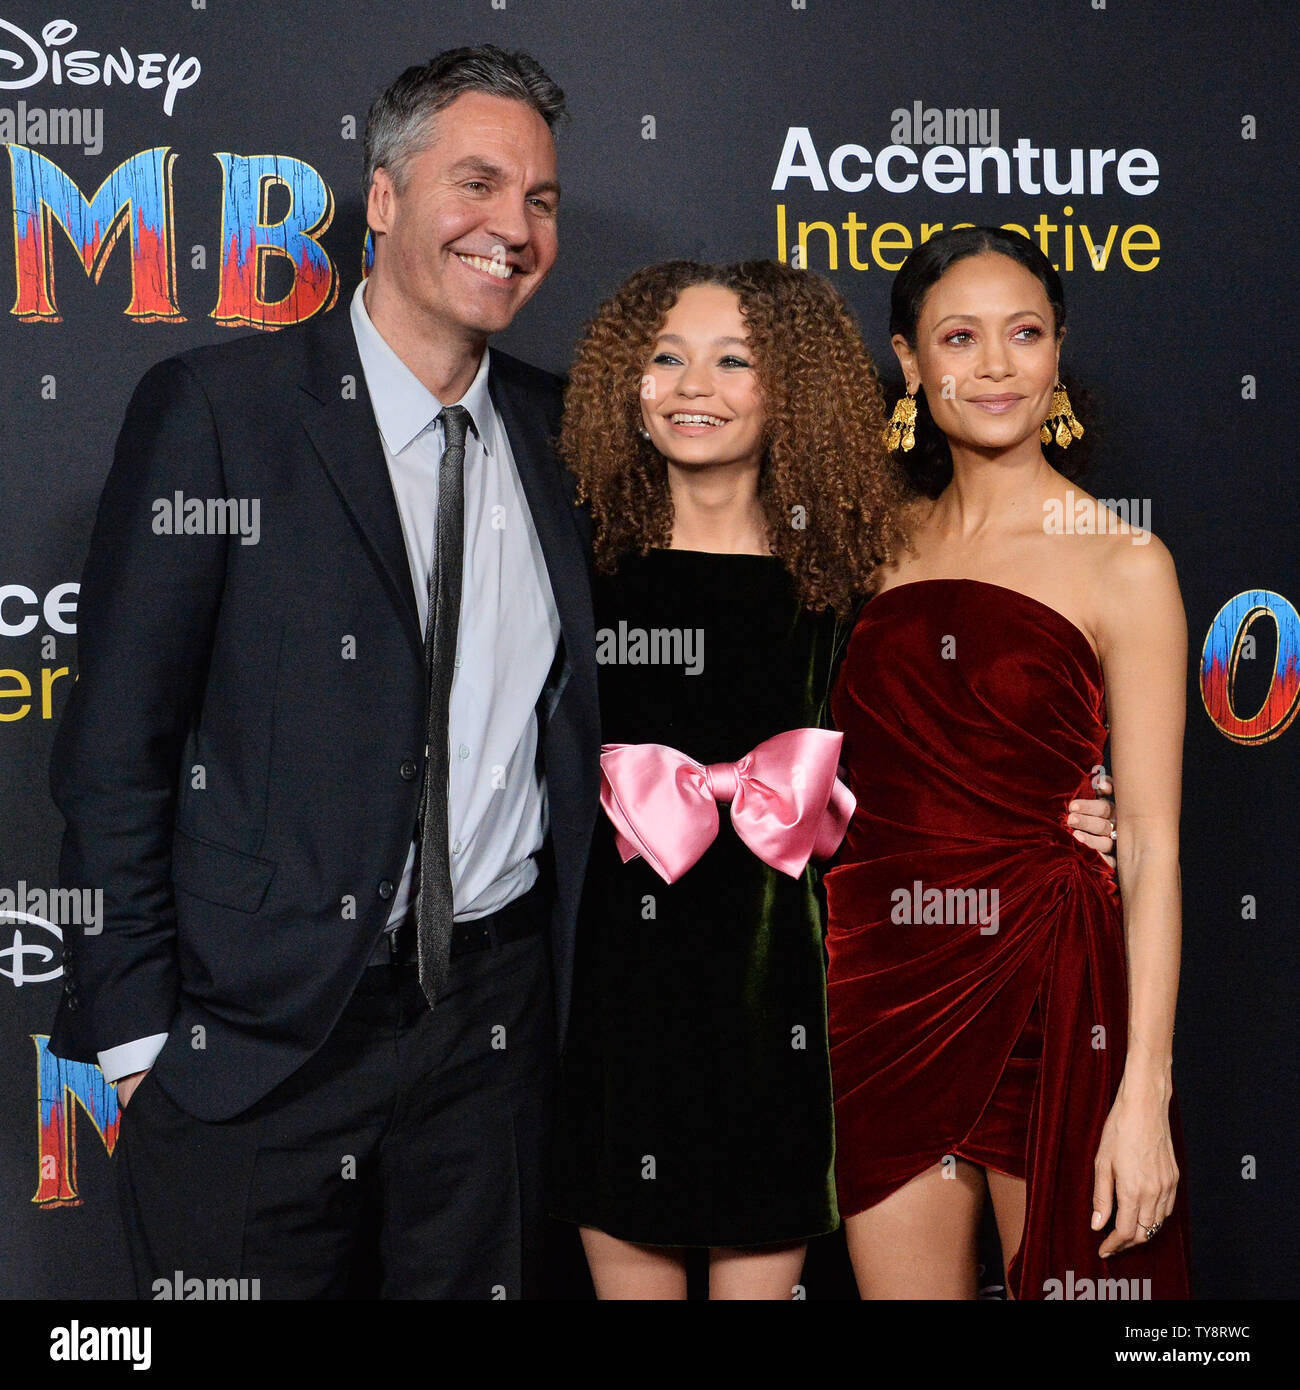 Ol Parker, Nico Parker, and Thandie Newton attend the premiere of the motion picture fantasy 'Dumbo' at the Ray Dolby Ballroom, Loews Hollywood Hotel in the Hollywood section of Los Angeles on March 11, 2019. Storyline: A young elephant, whose oversized ears enable him to fly, helps save a struggling circus, but when the circus plans a new venture, Dumbo and his friends discover dark secrets beneath its shiny veneer.  Photo by Jim Ruymen/UPI Stock Photo